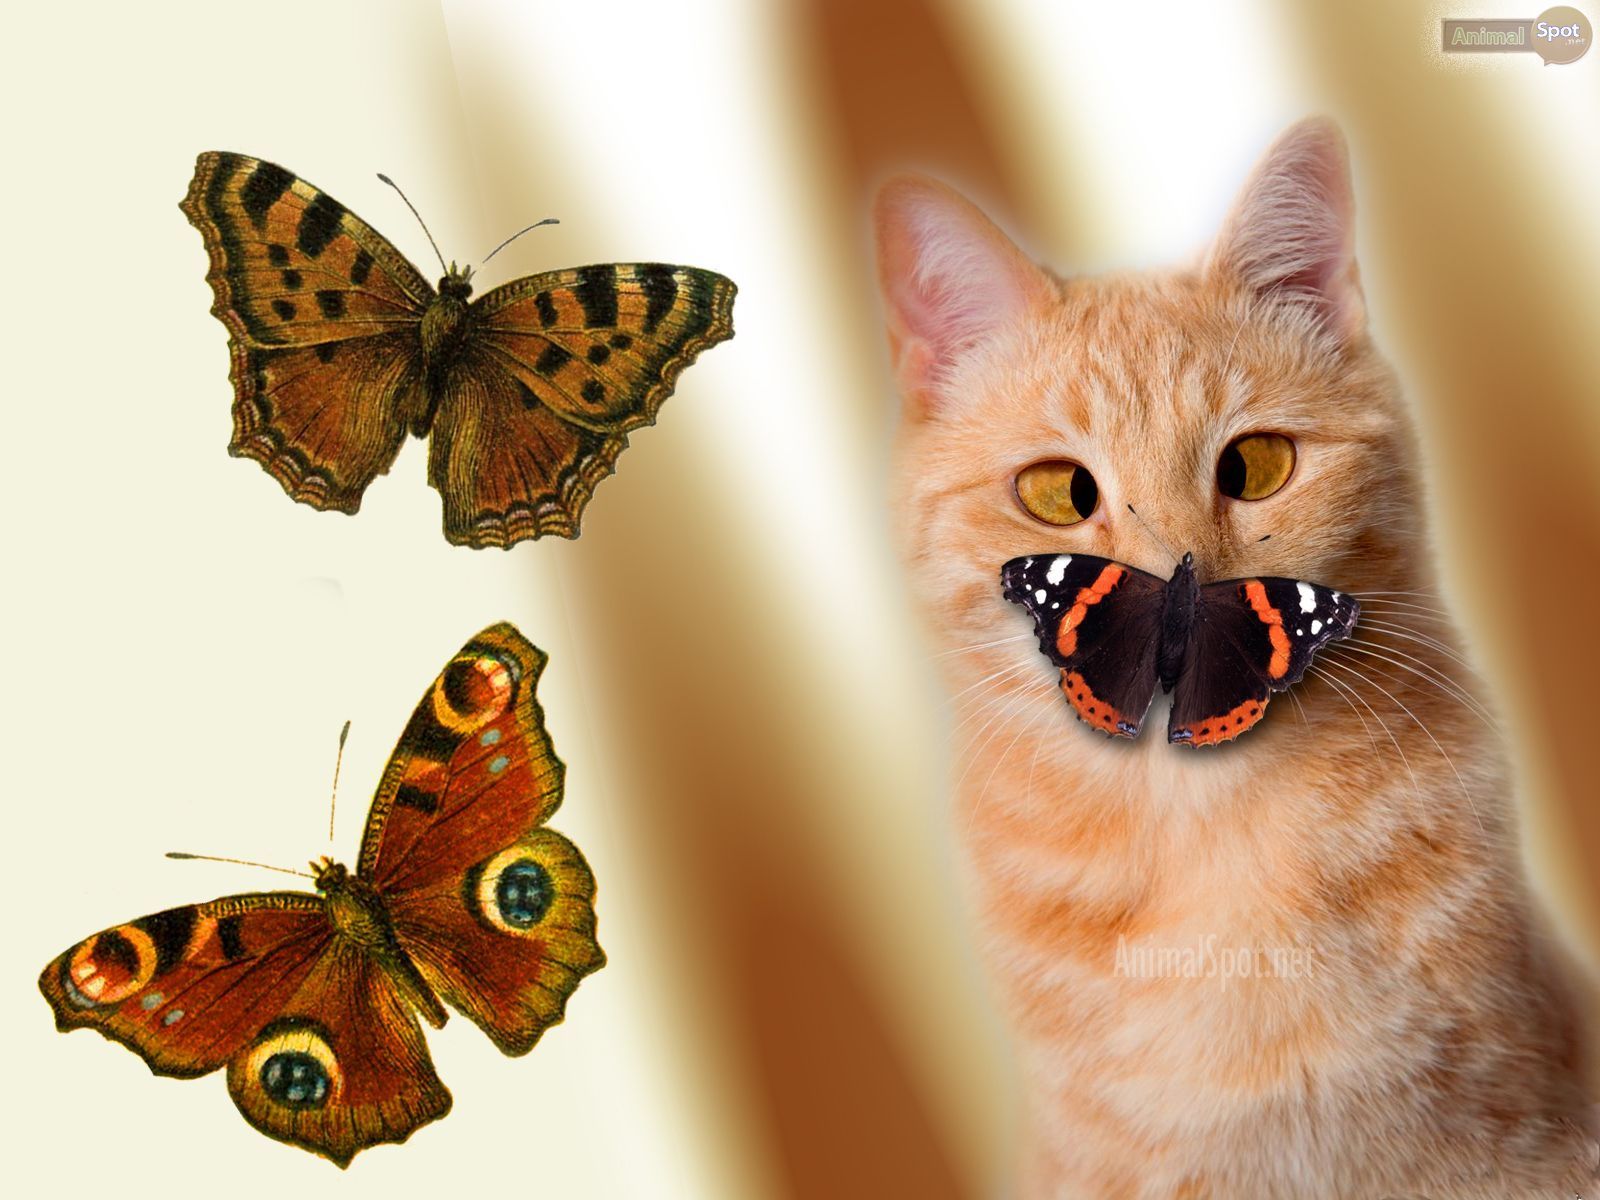 Butterfly Wallpapers Animal Spot